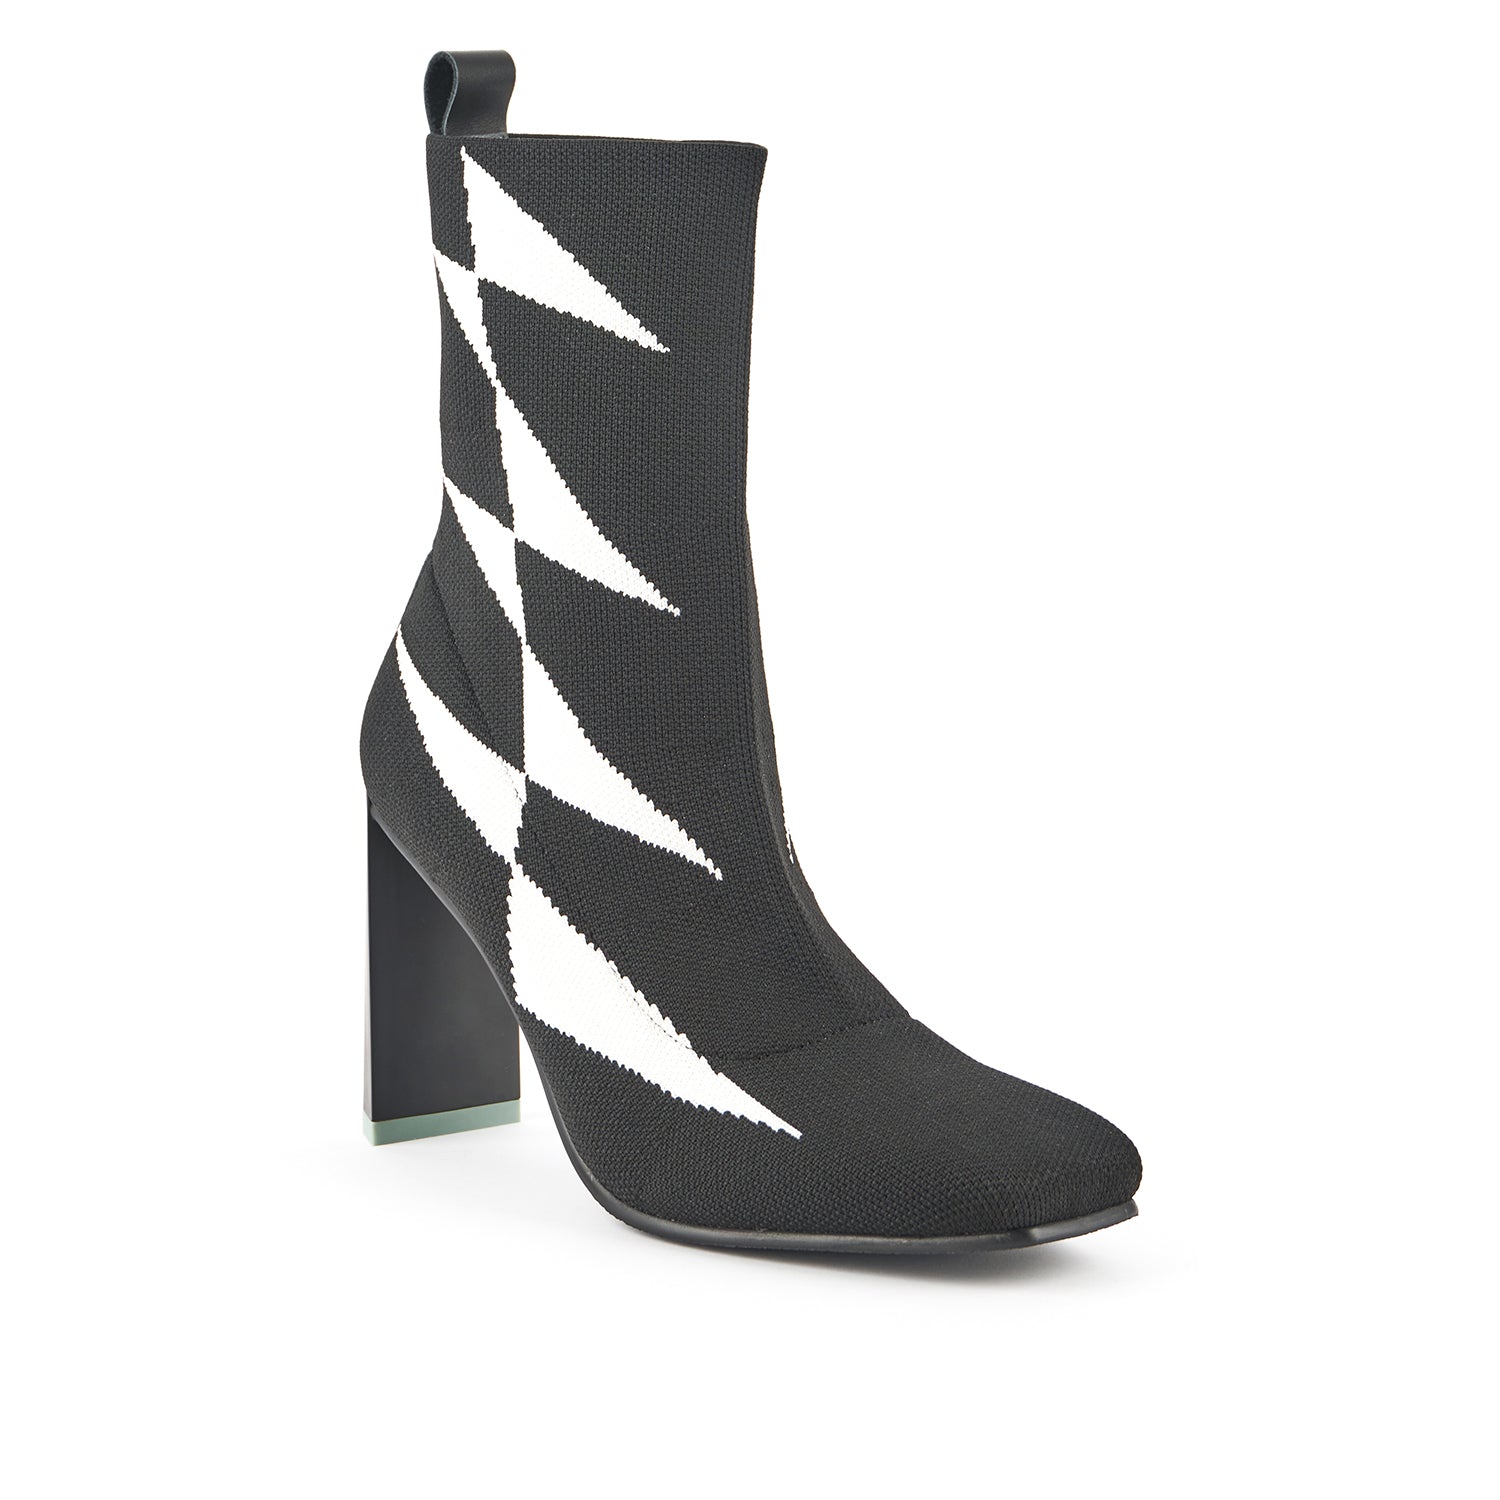 Outer front side view of the united nude tara boot hi in mono